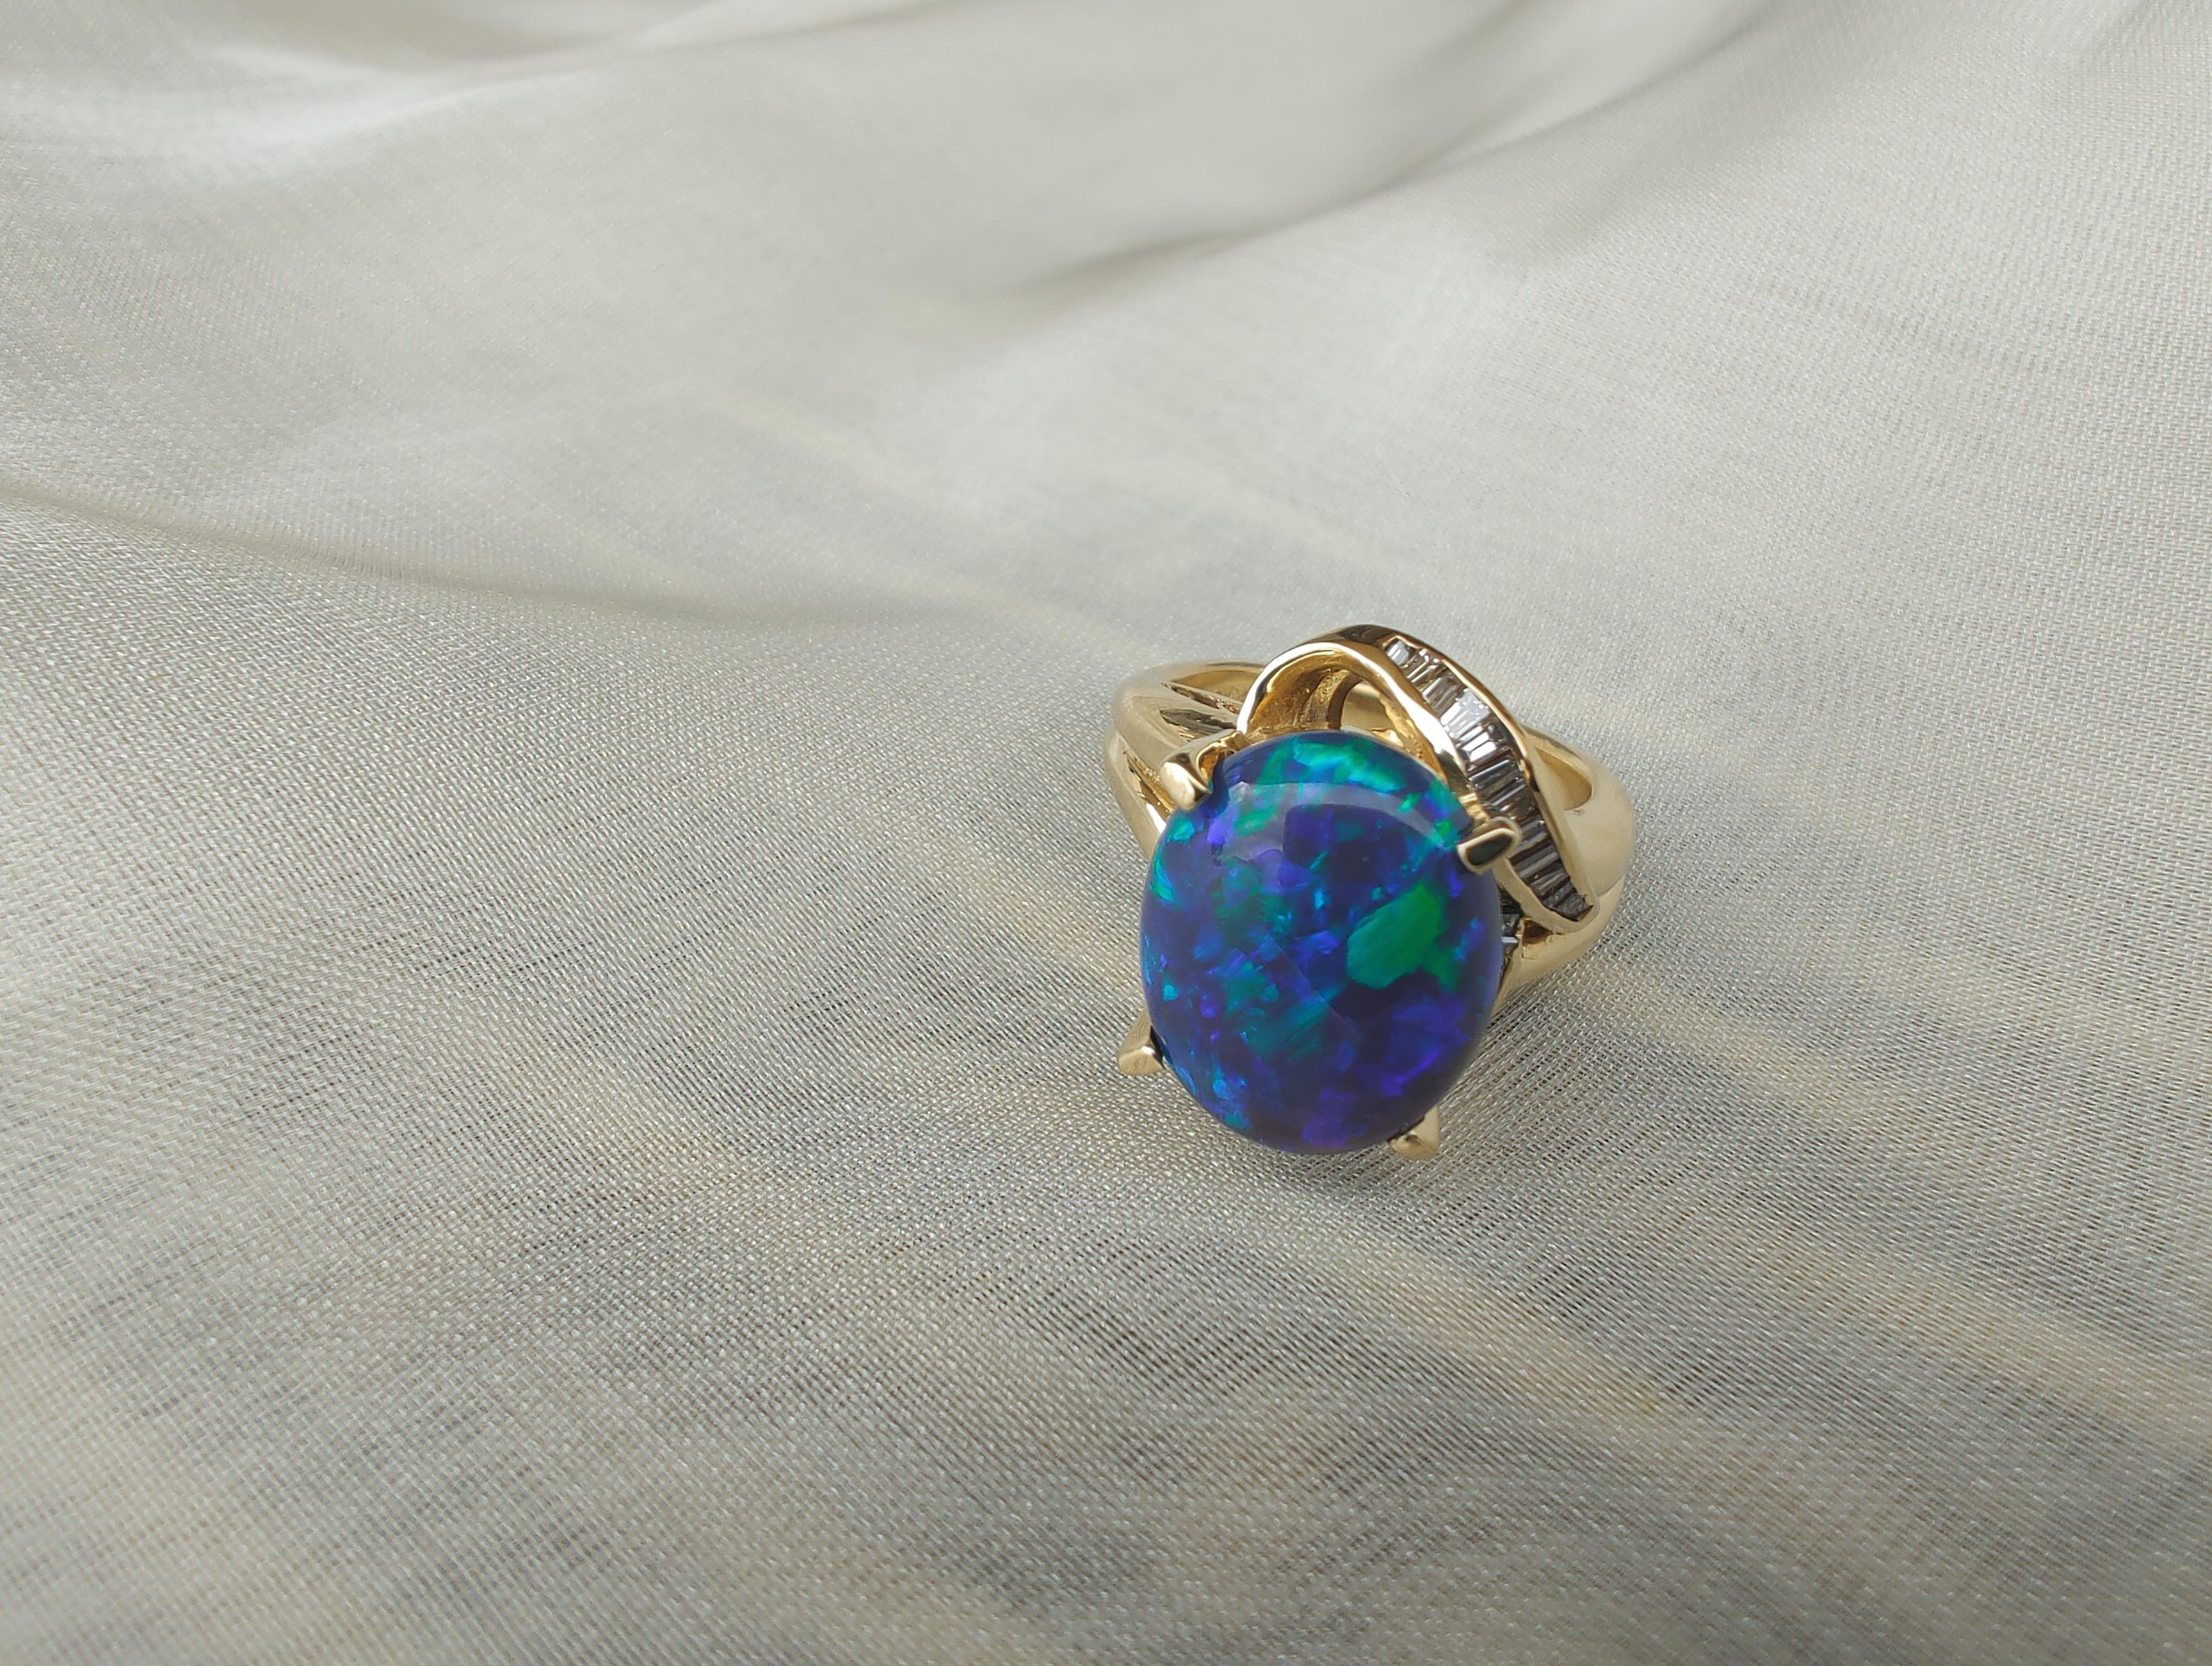 Australian gem quality solid black Opal (10.8x13.1mm) and tapered baguette diamond ring set in 18ct yellow gold.
Black opal is often called the “king of opals”. It was discovered in 1902 in Lightning Ridge, New South Wales, Australia.
Black opal is